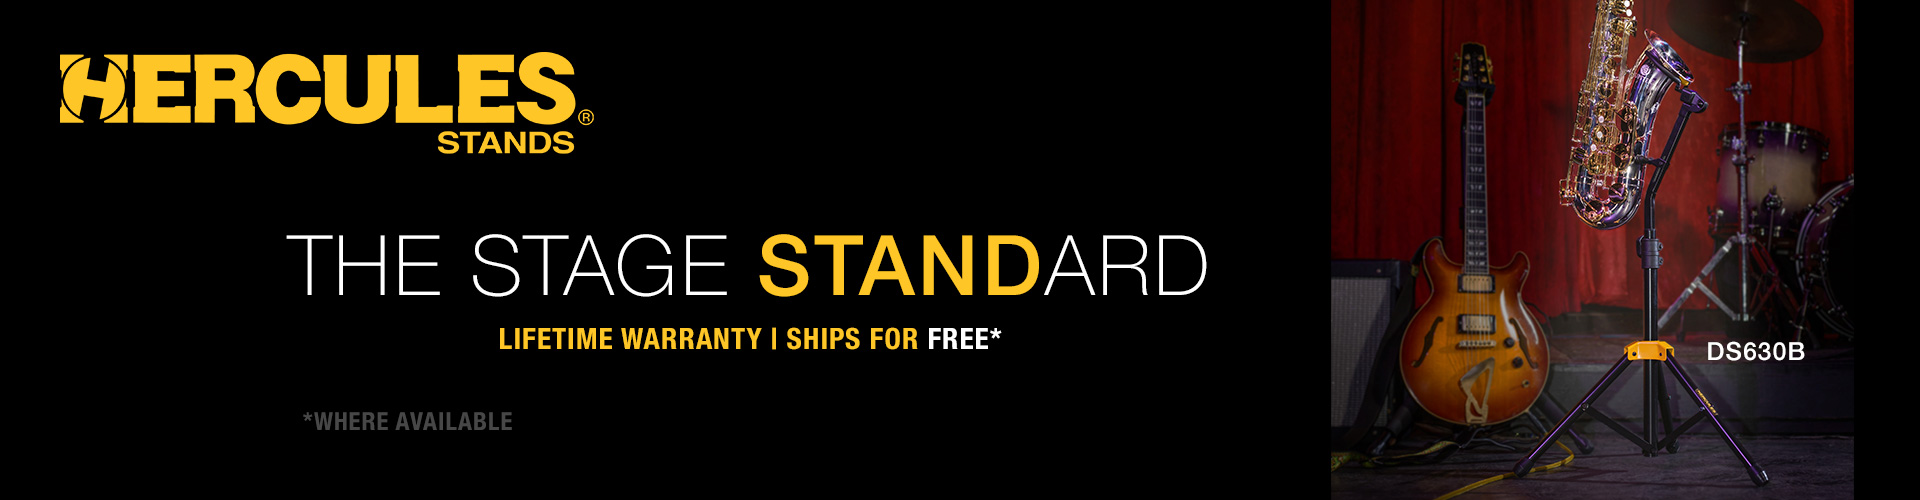 Sax Stands - The Stage Standard